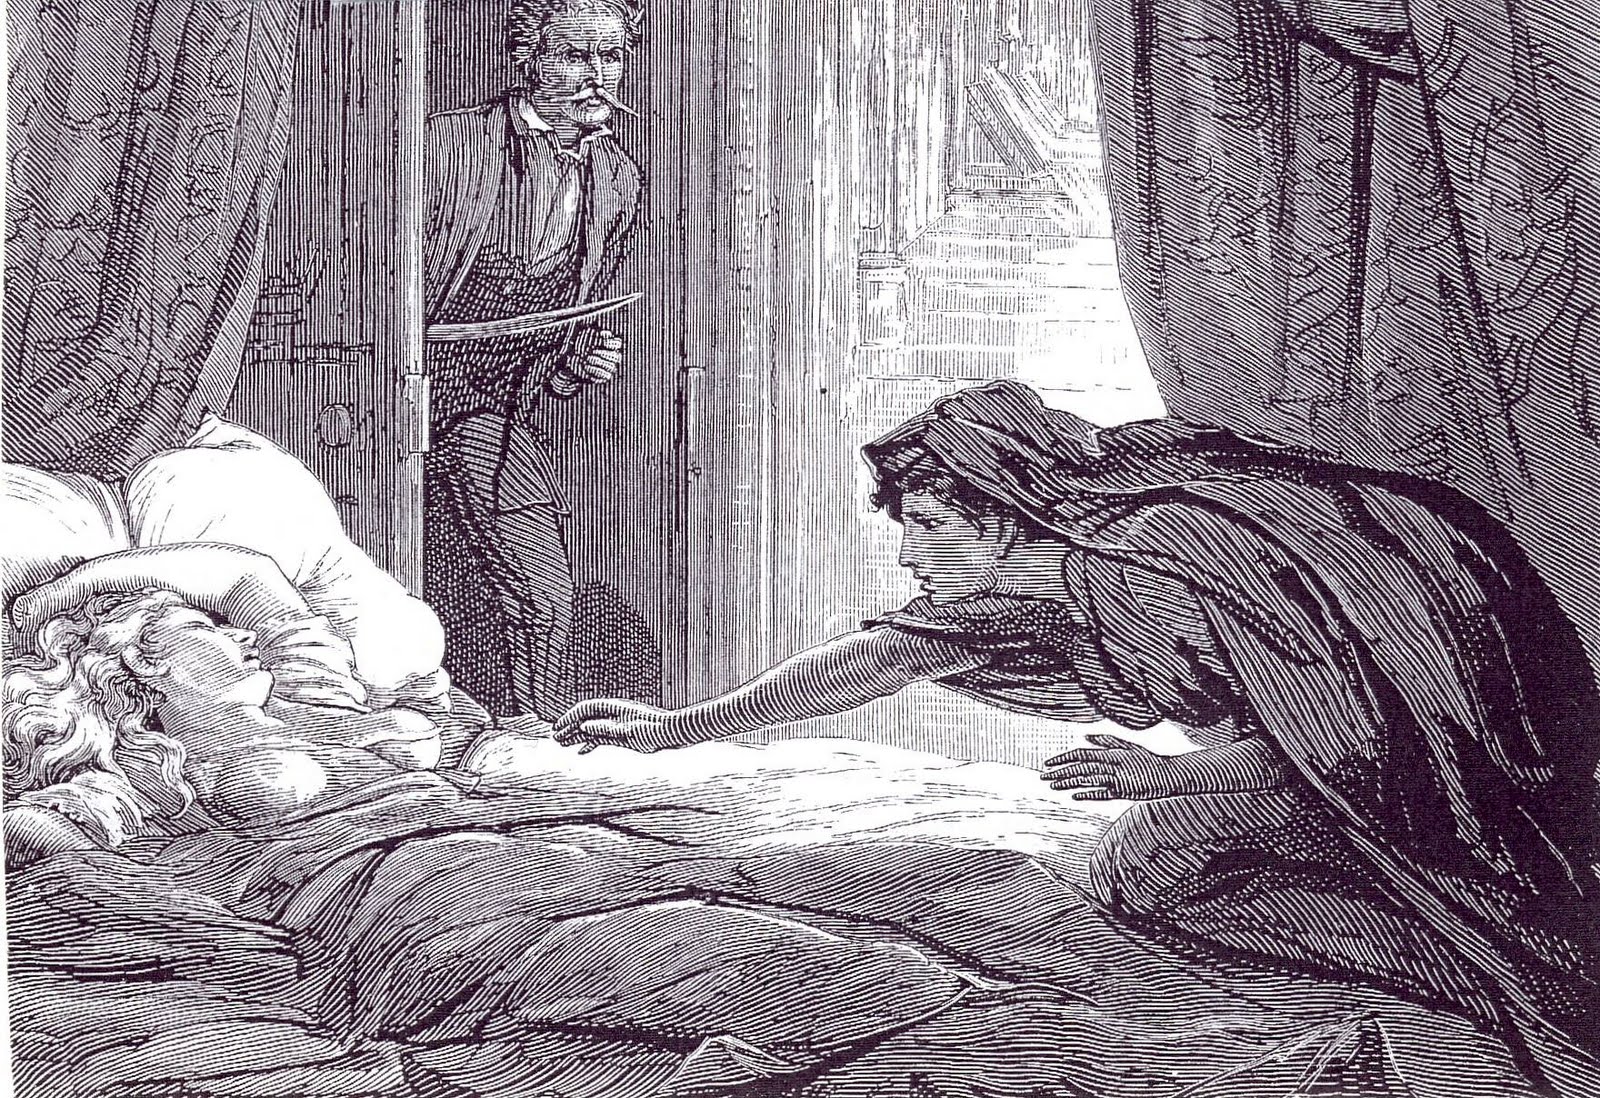 Illustration by D. H. Friston that accompanied the first publication of lesbian vampire novella Carmilla in The Dark Blue magazine in 1872